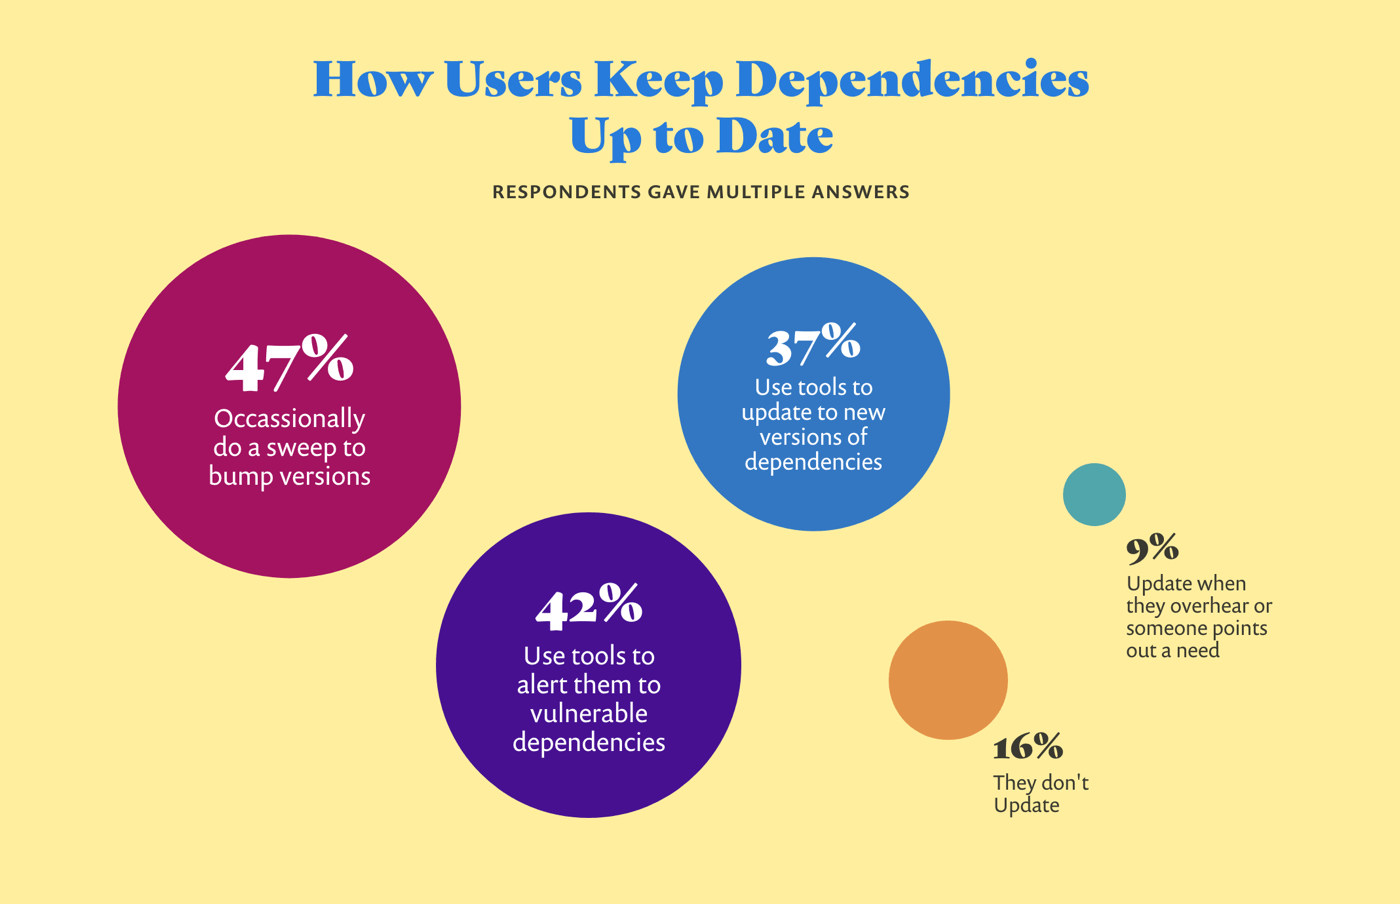 Some stats: 47% of developers occasionally do a sweep to bump versions. 42% use tools to alert them to vulnerable dependencies. 37% use tools to update to new versions of dependencies. 16% don't update, and 9% update when they overhear or someone points out a need.